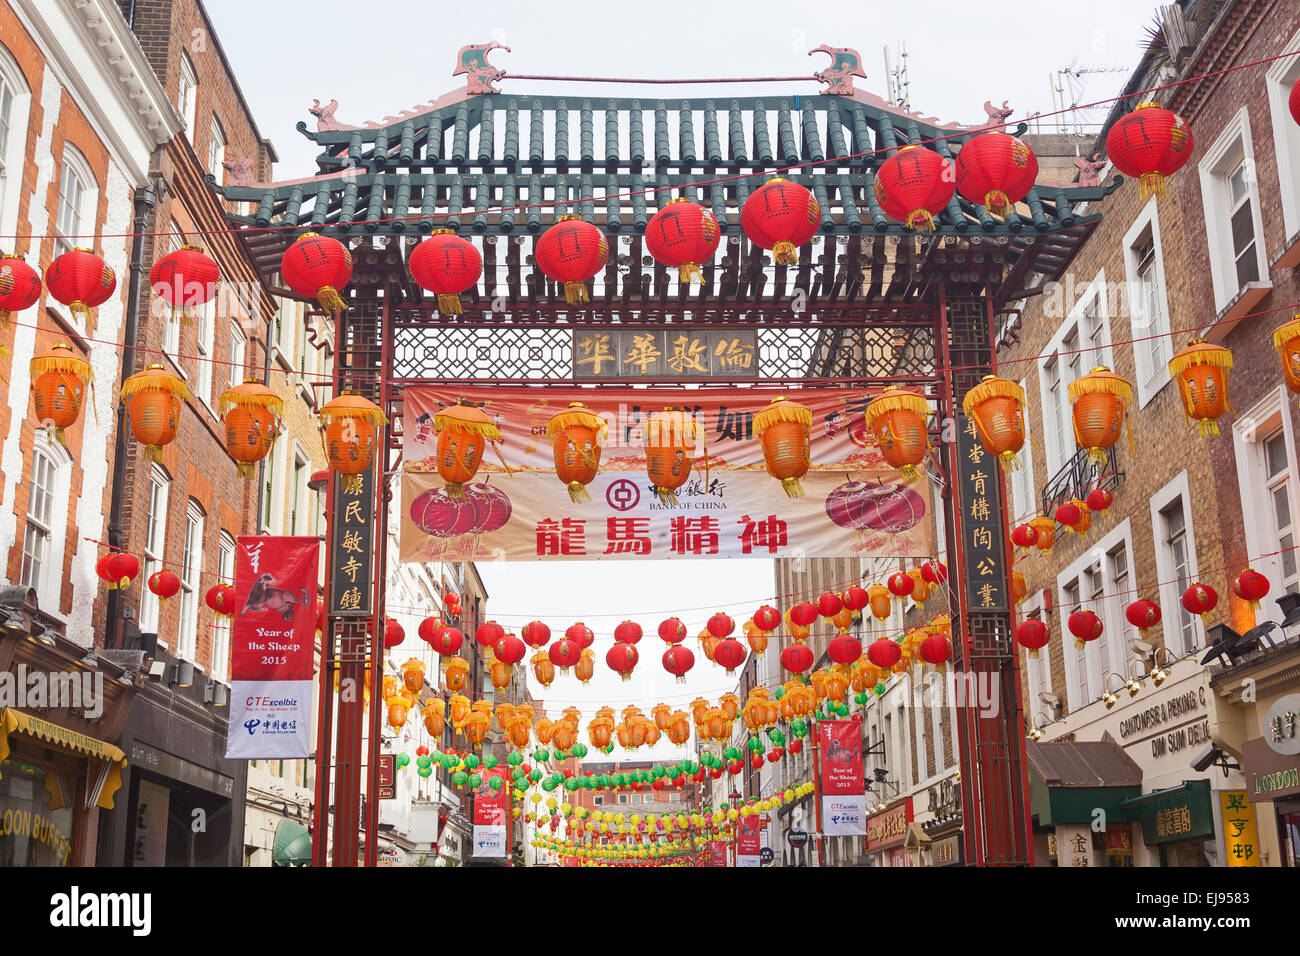 London, Soho  The entrance to Gerrard Street, with Chinese lanterns celebrating the Chinese New Year Stock Photo